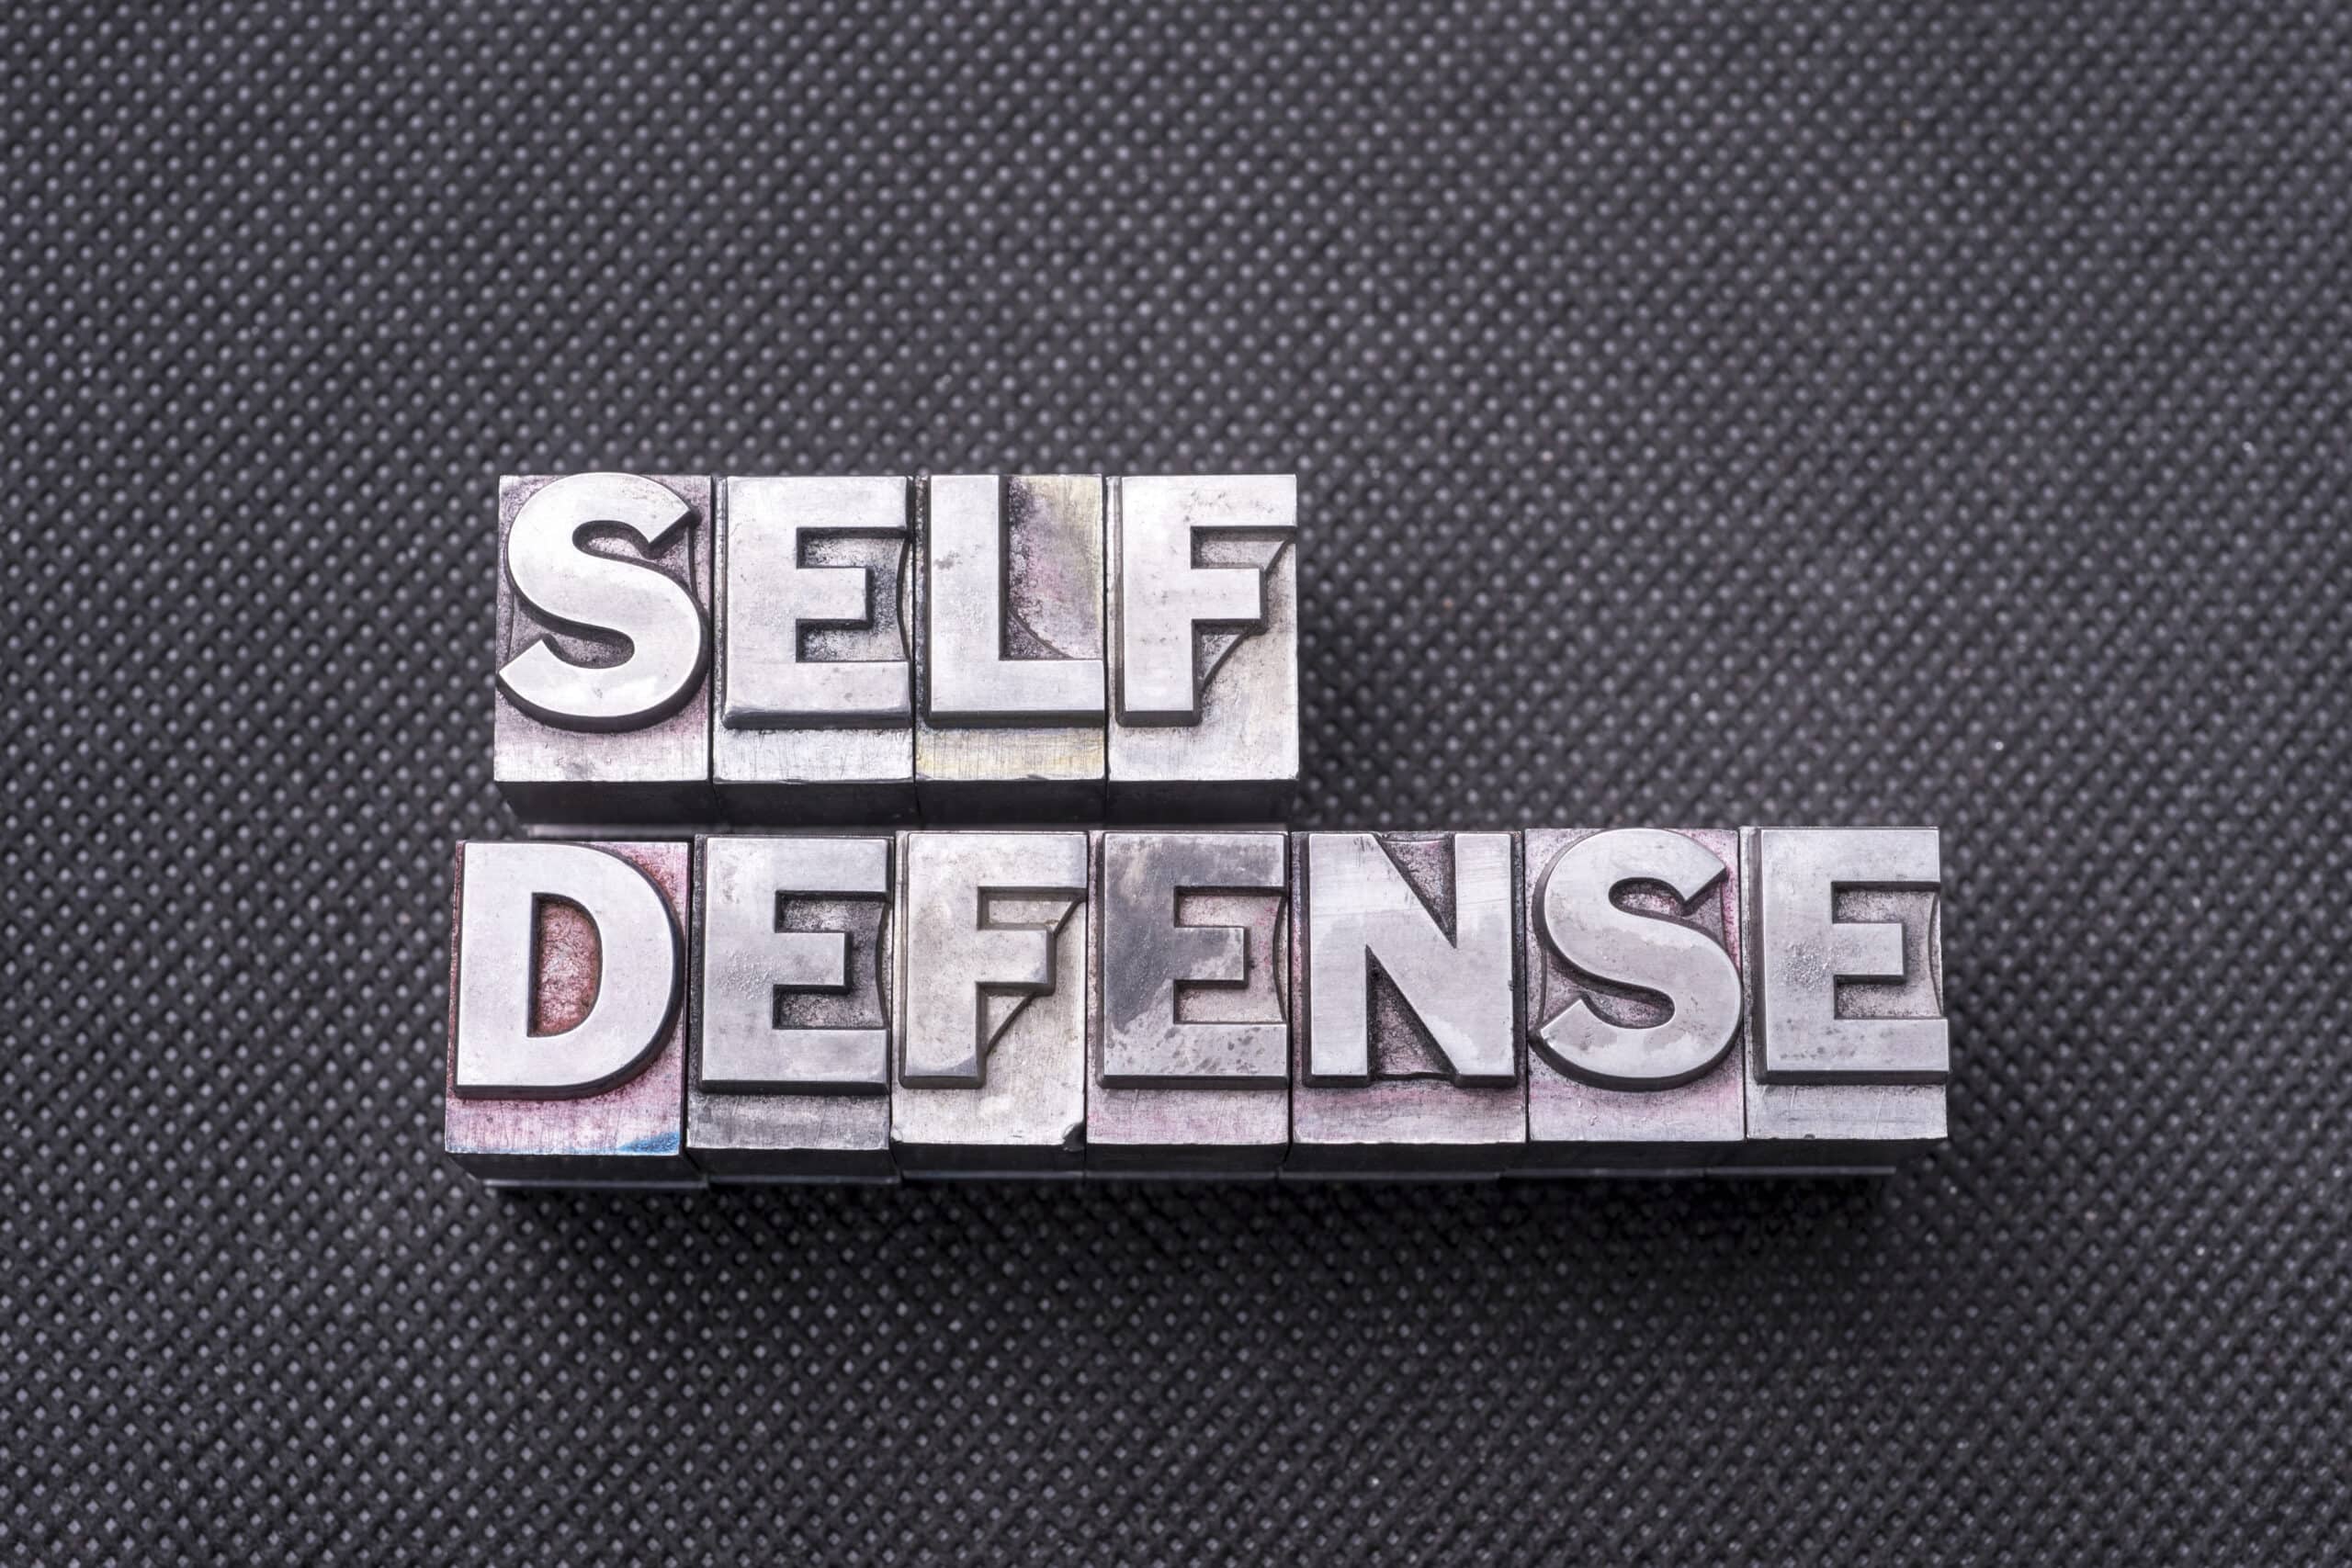 What Should I Do if I Use Deadly Force In Self-Defense in Colorado?